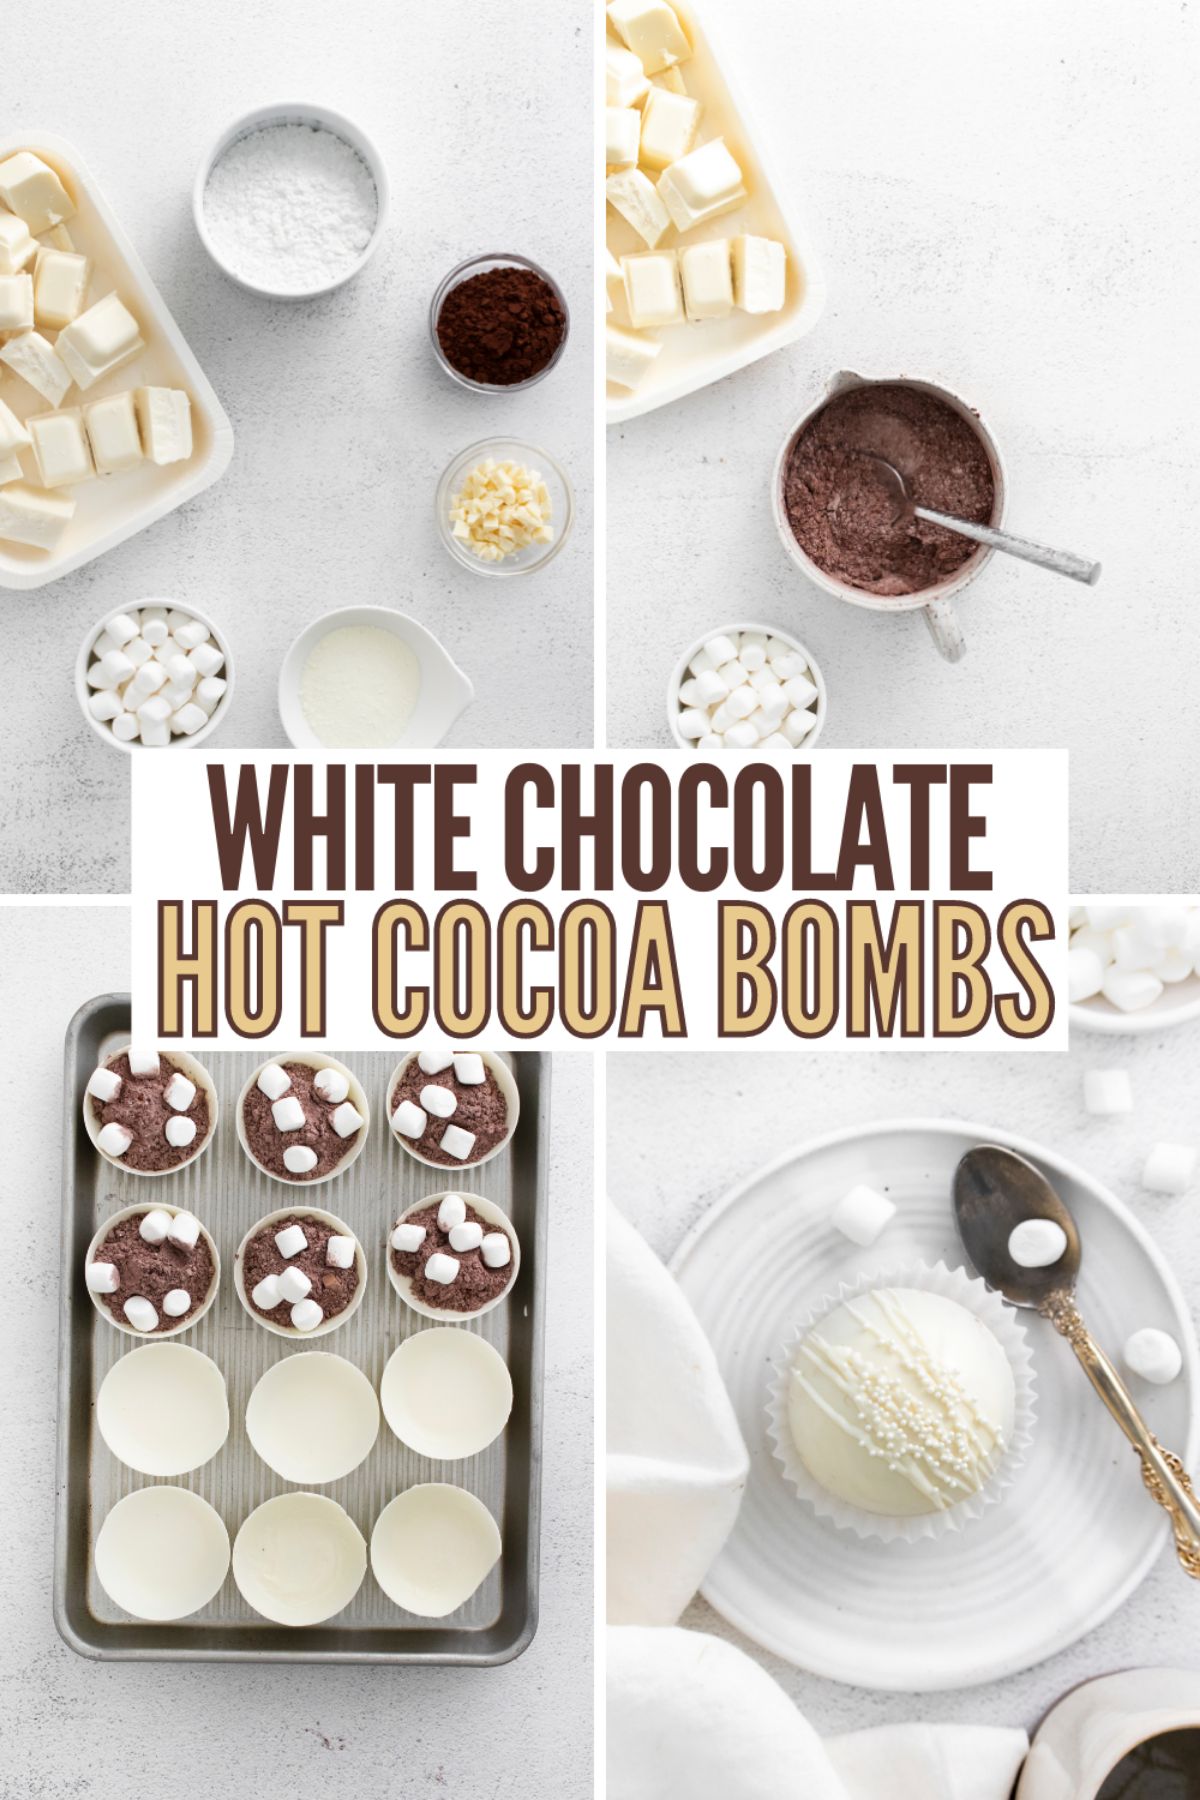 This White Chocolate Hot Cocoa Bomb is the perfect white chocolate twist on a traditional cocoa bomb. It reminds me of freshly fallen snow. #hotcocoabomb #hotcocoa #whitechocolate #recipe #cocoabomb via @wondermomwannab